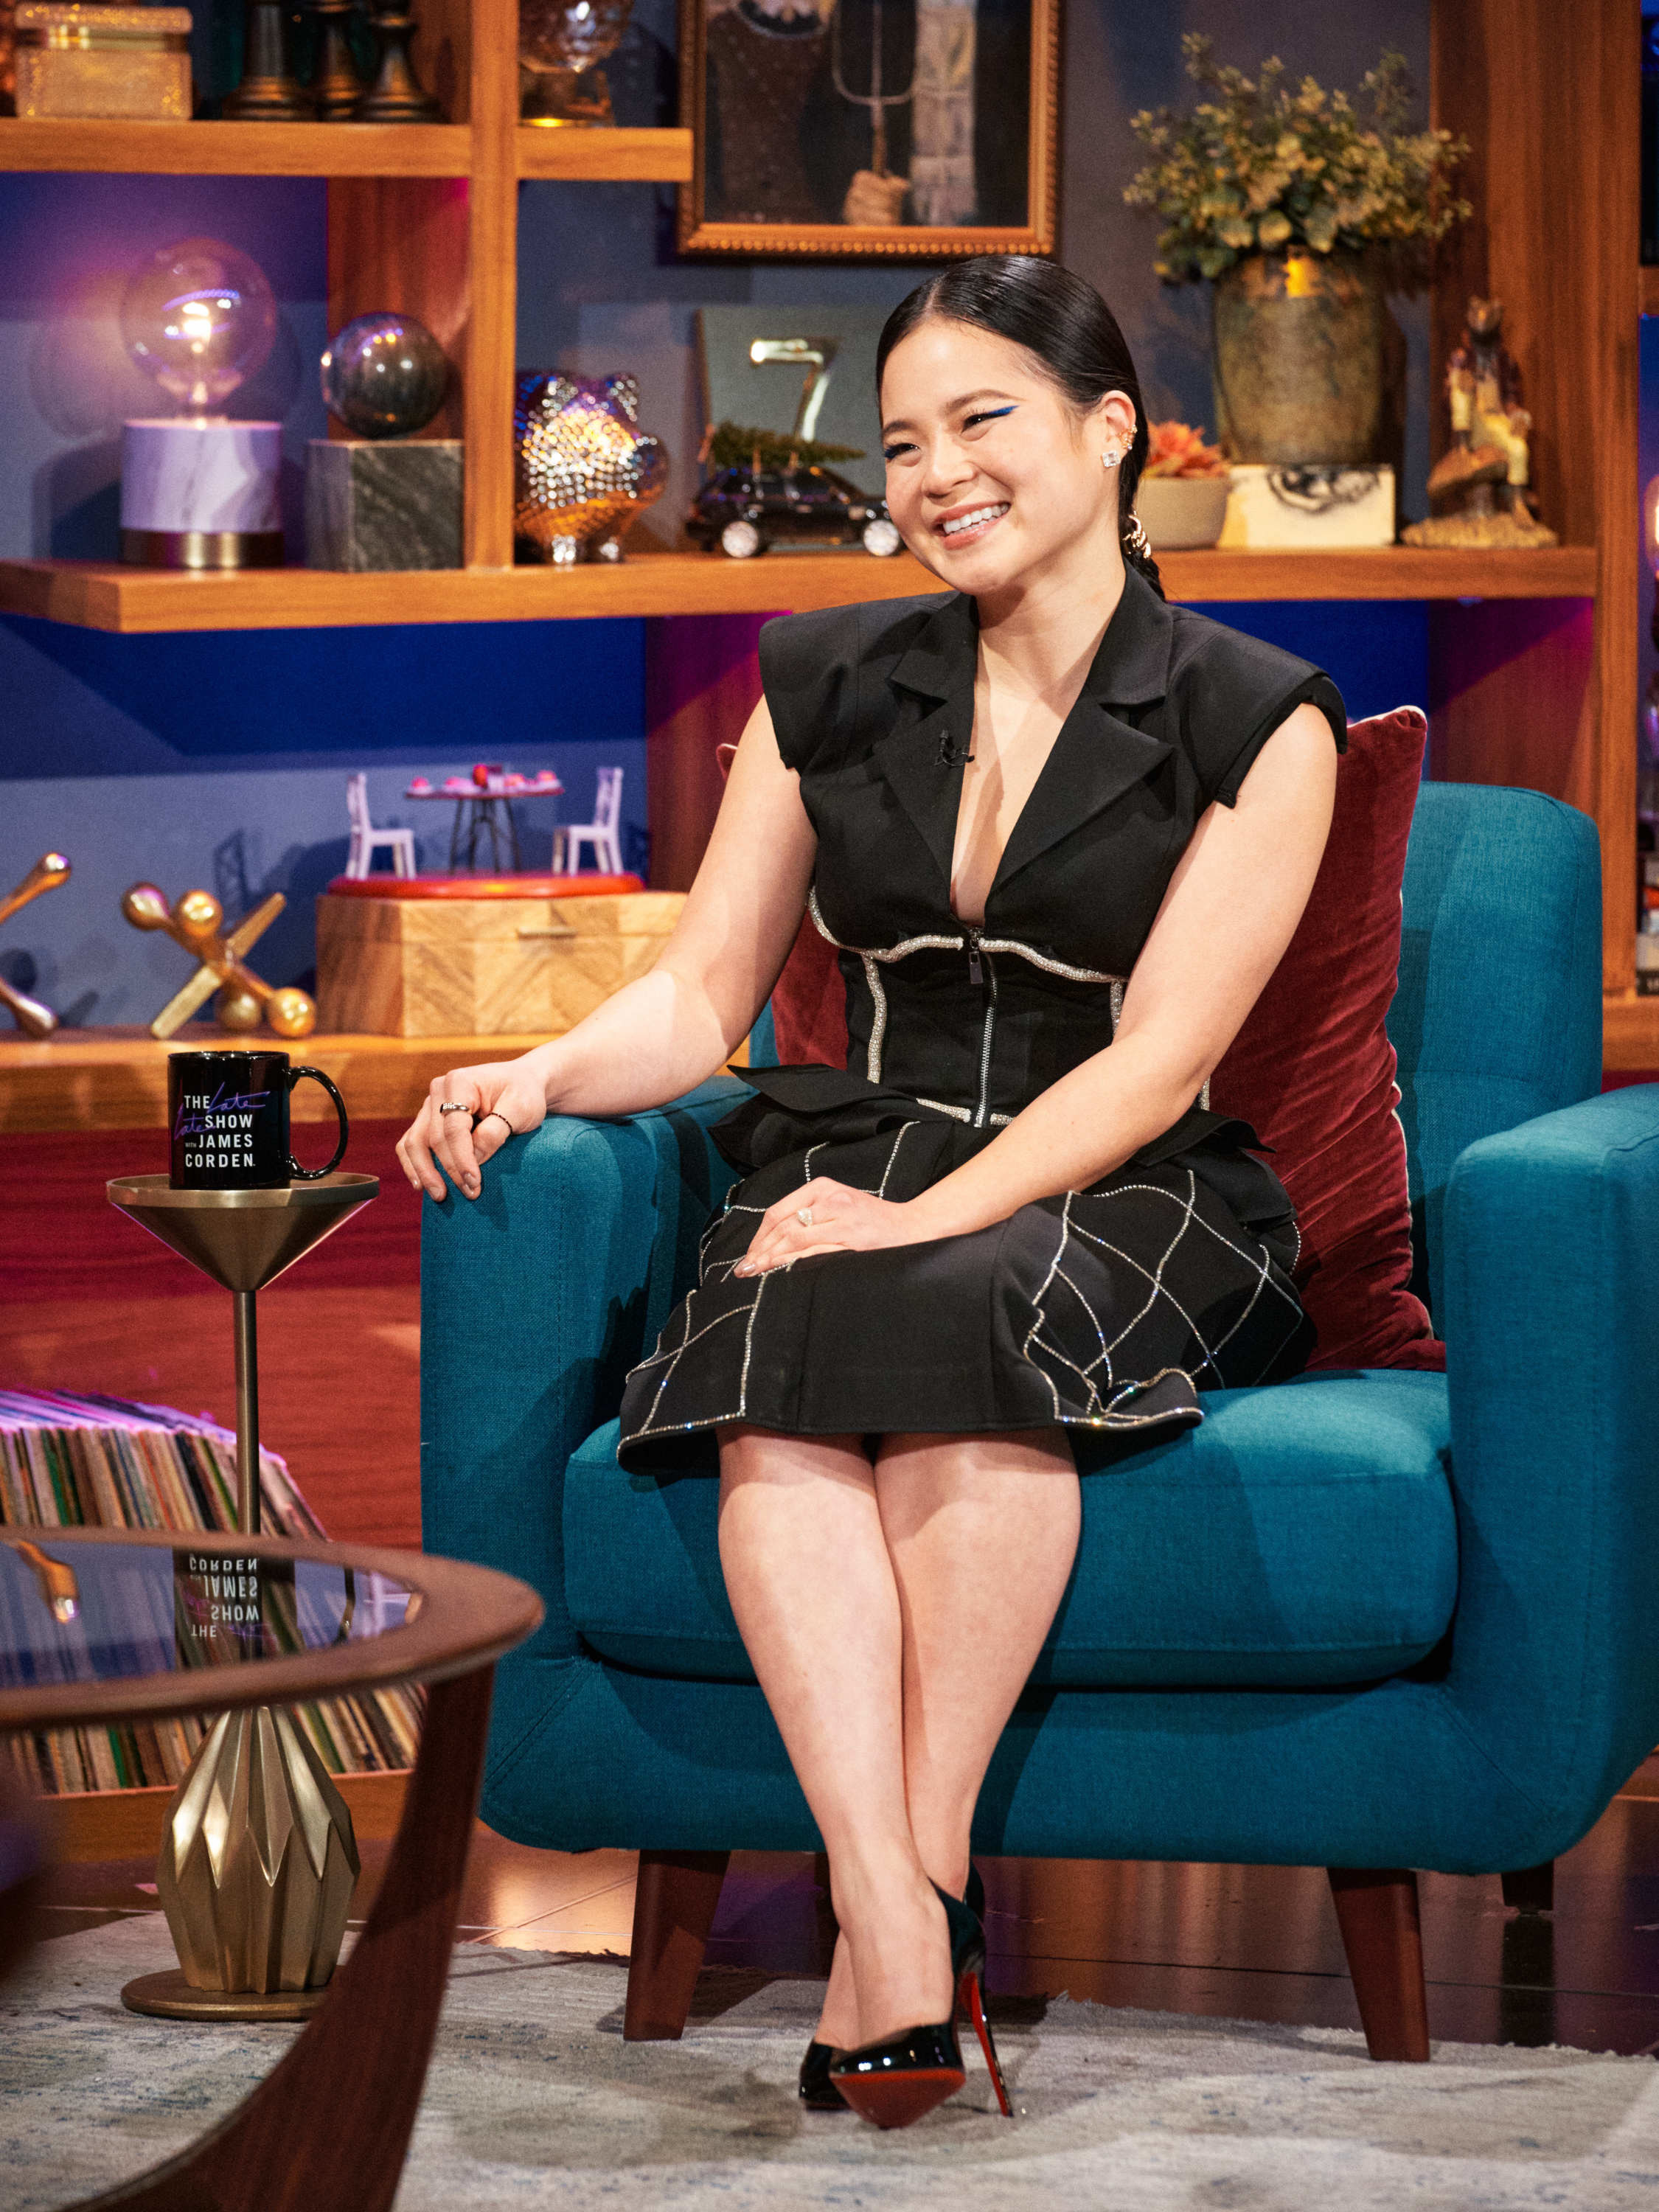 Kelly Marie Tran on the Late Late Show